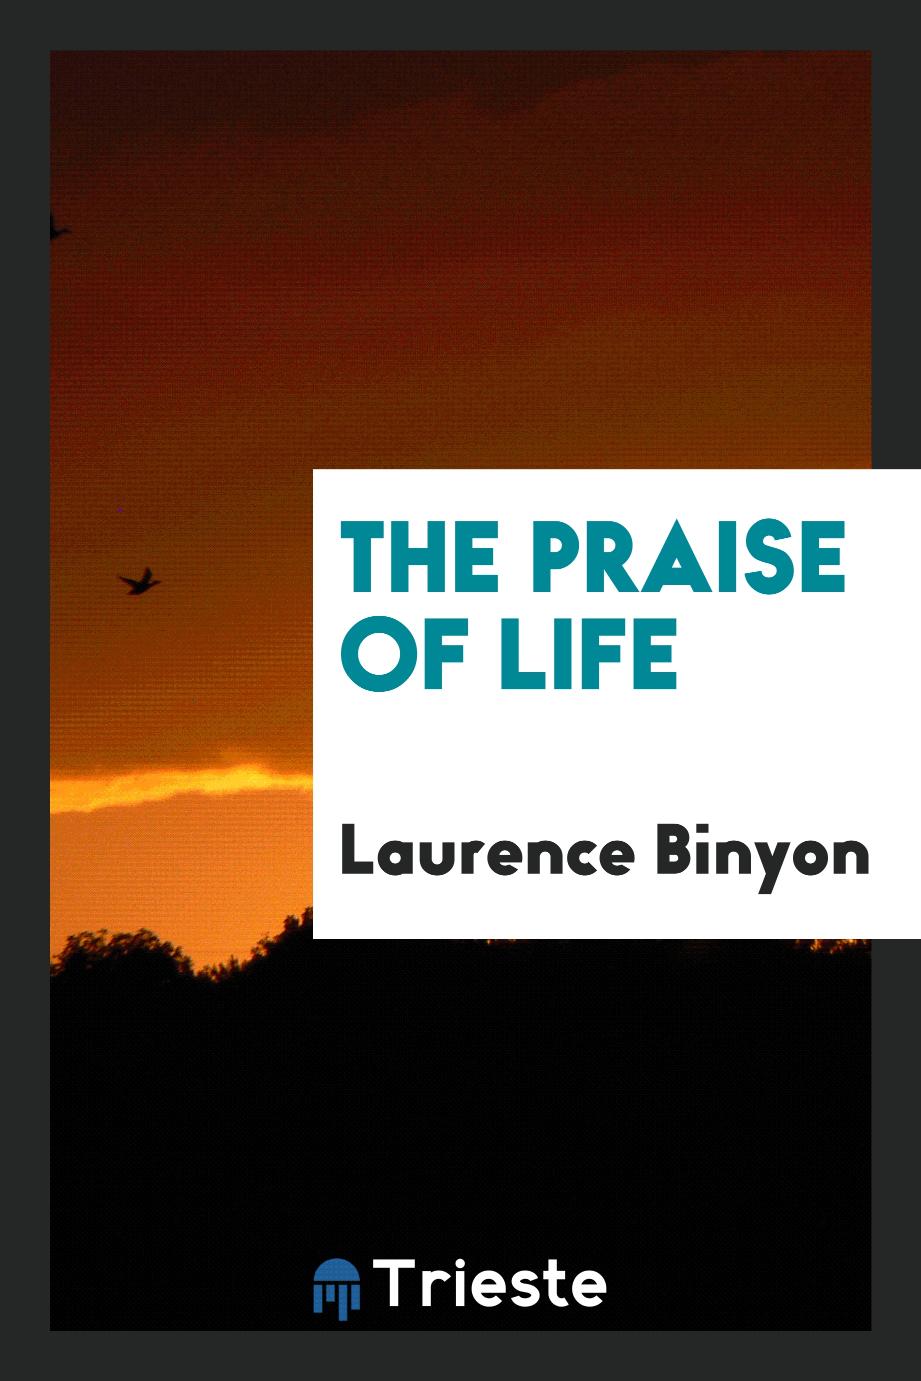 The Praise of Life